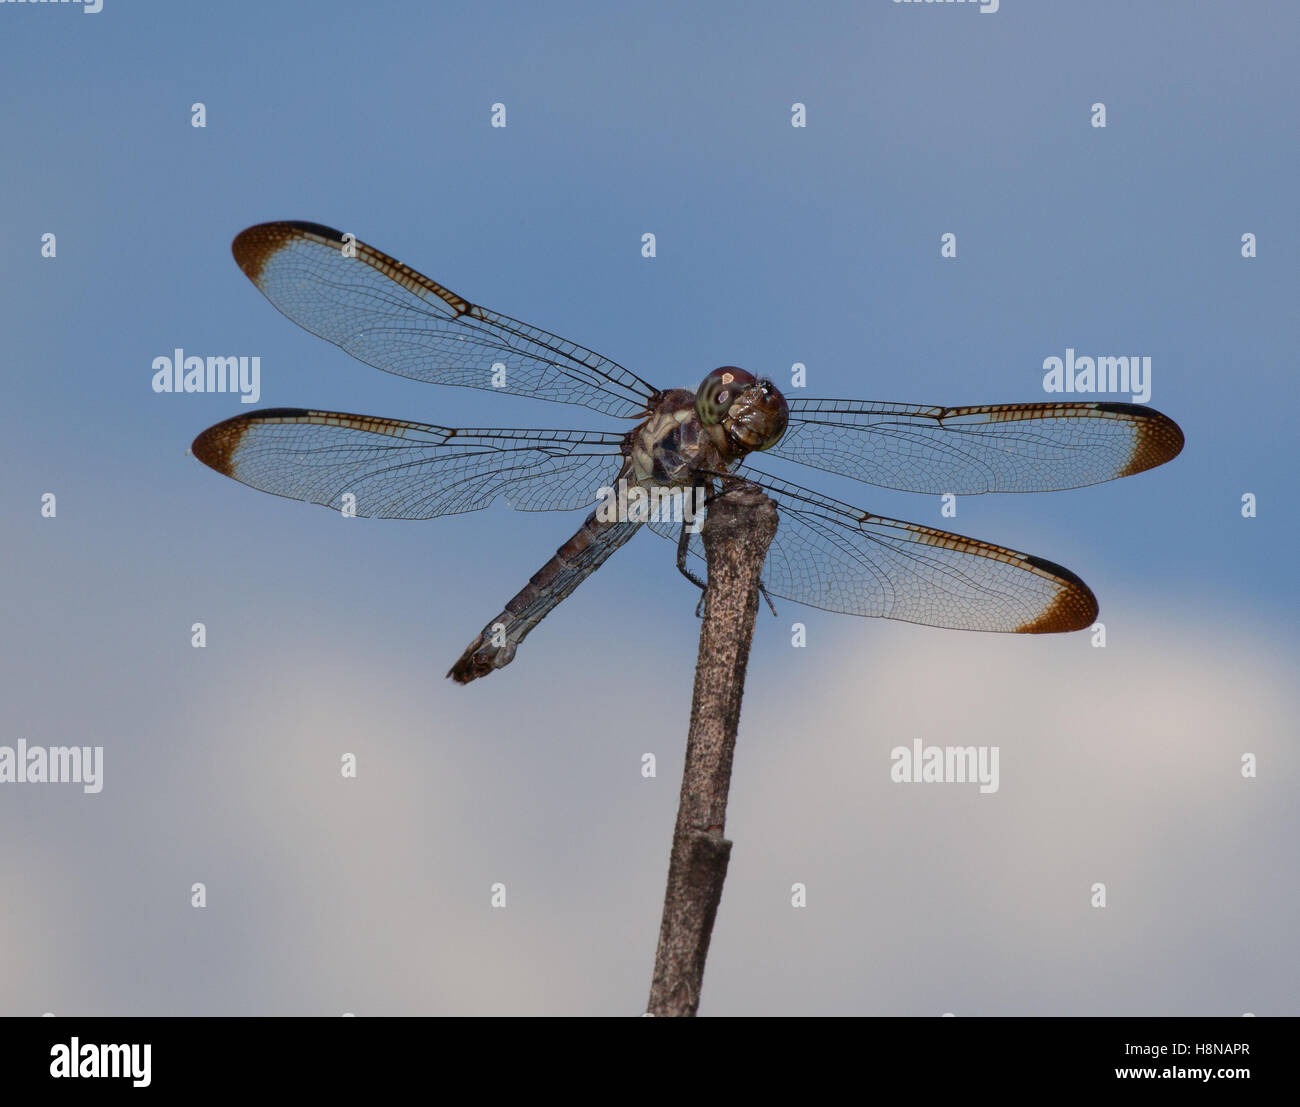 Dragonfly with the clouds and sky behind on a stick Stock Photo